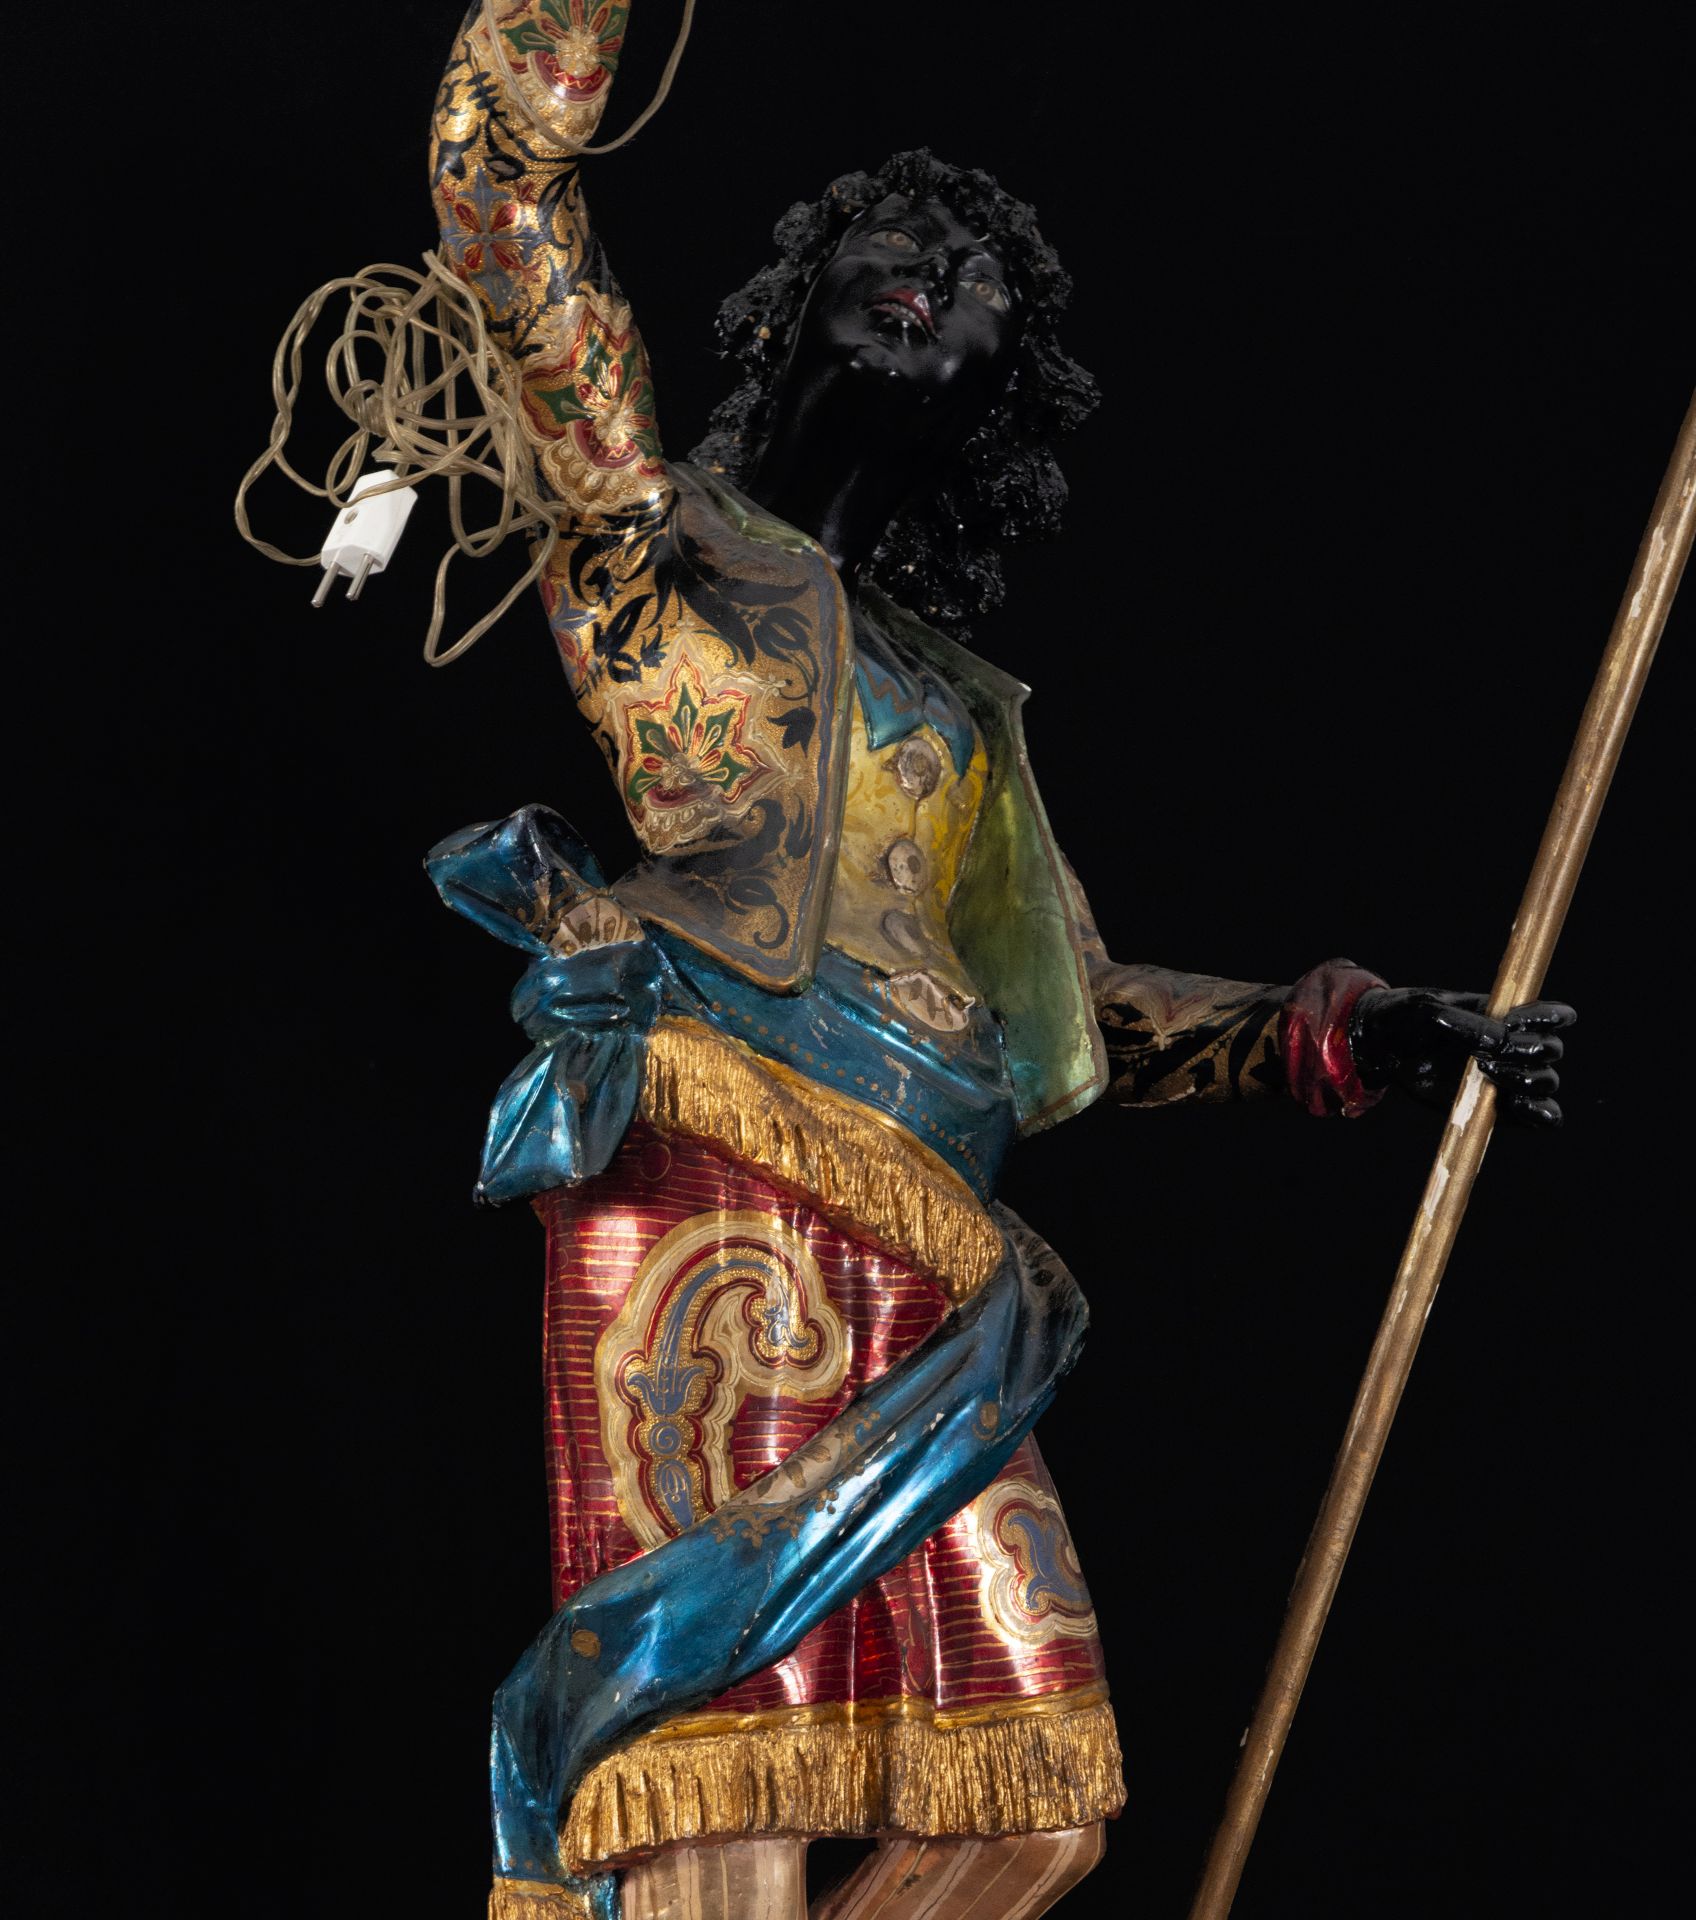 Monumental Pair of Venetian Torcheros in bronze with velvet bases, 19th century - early 20th century - Image 23 of 26